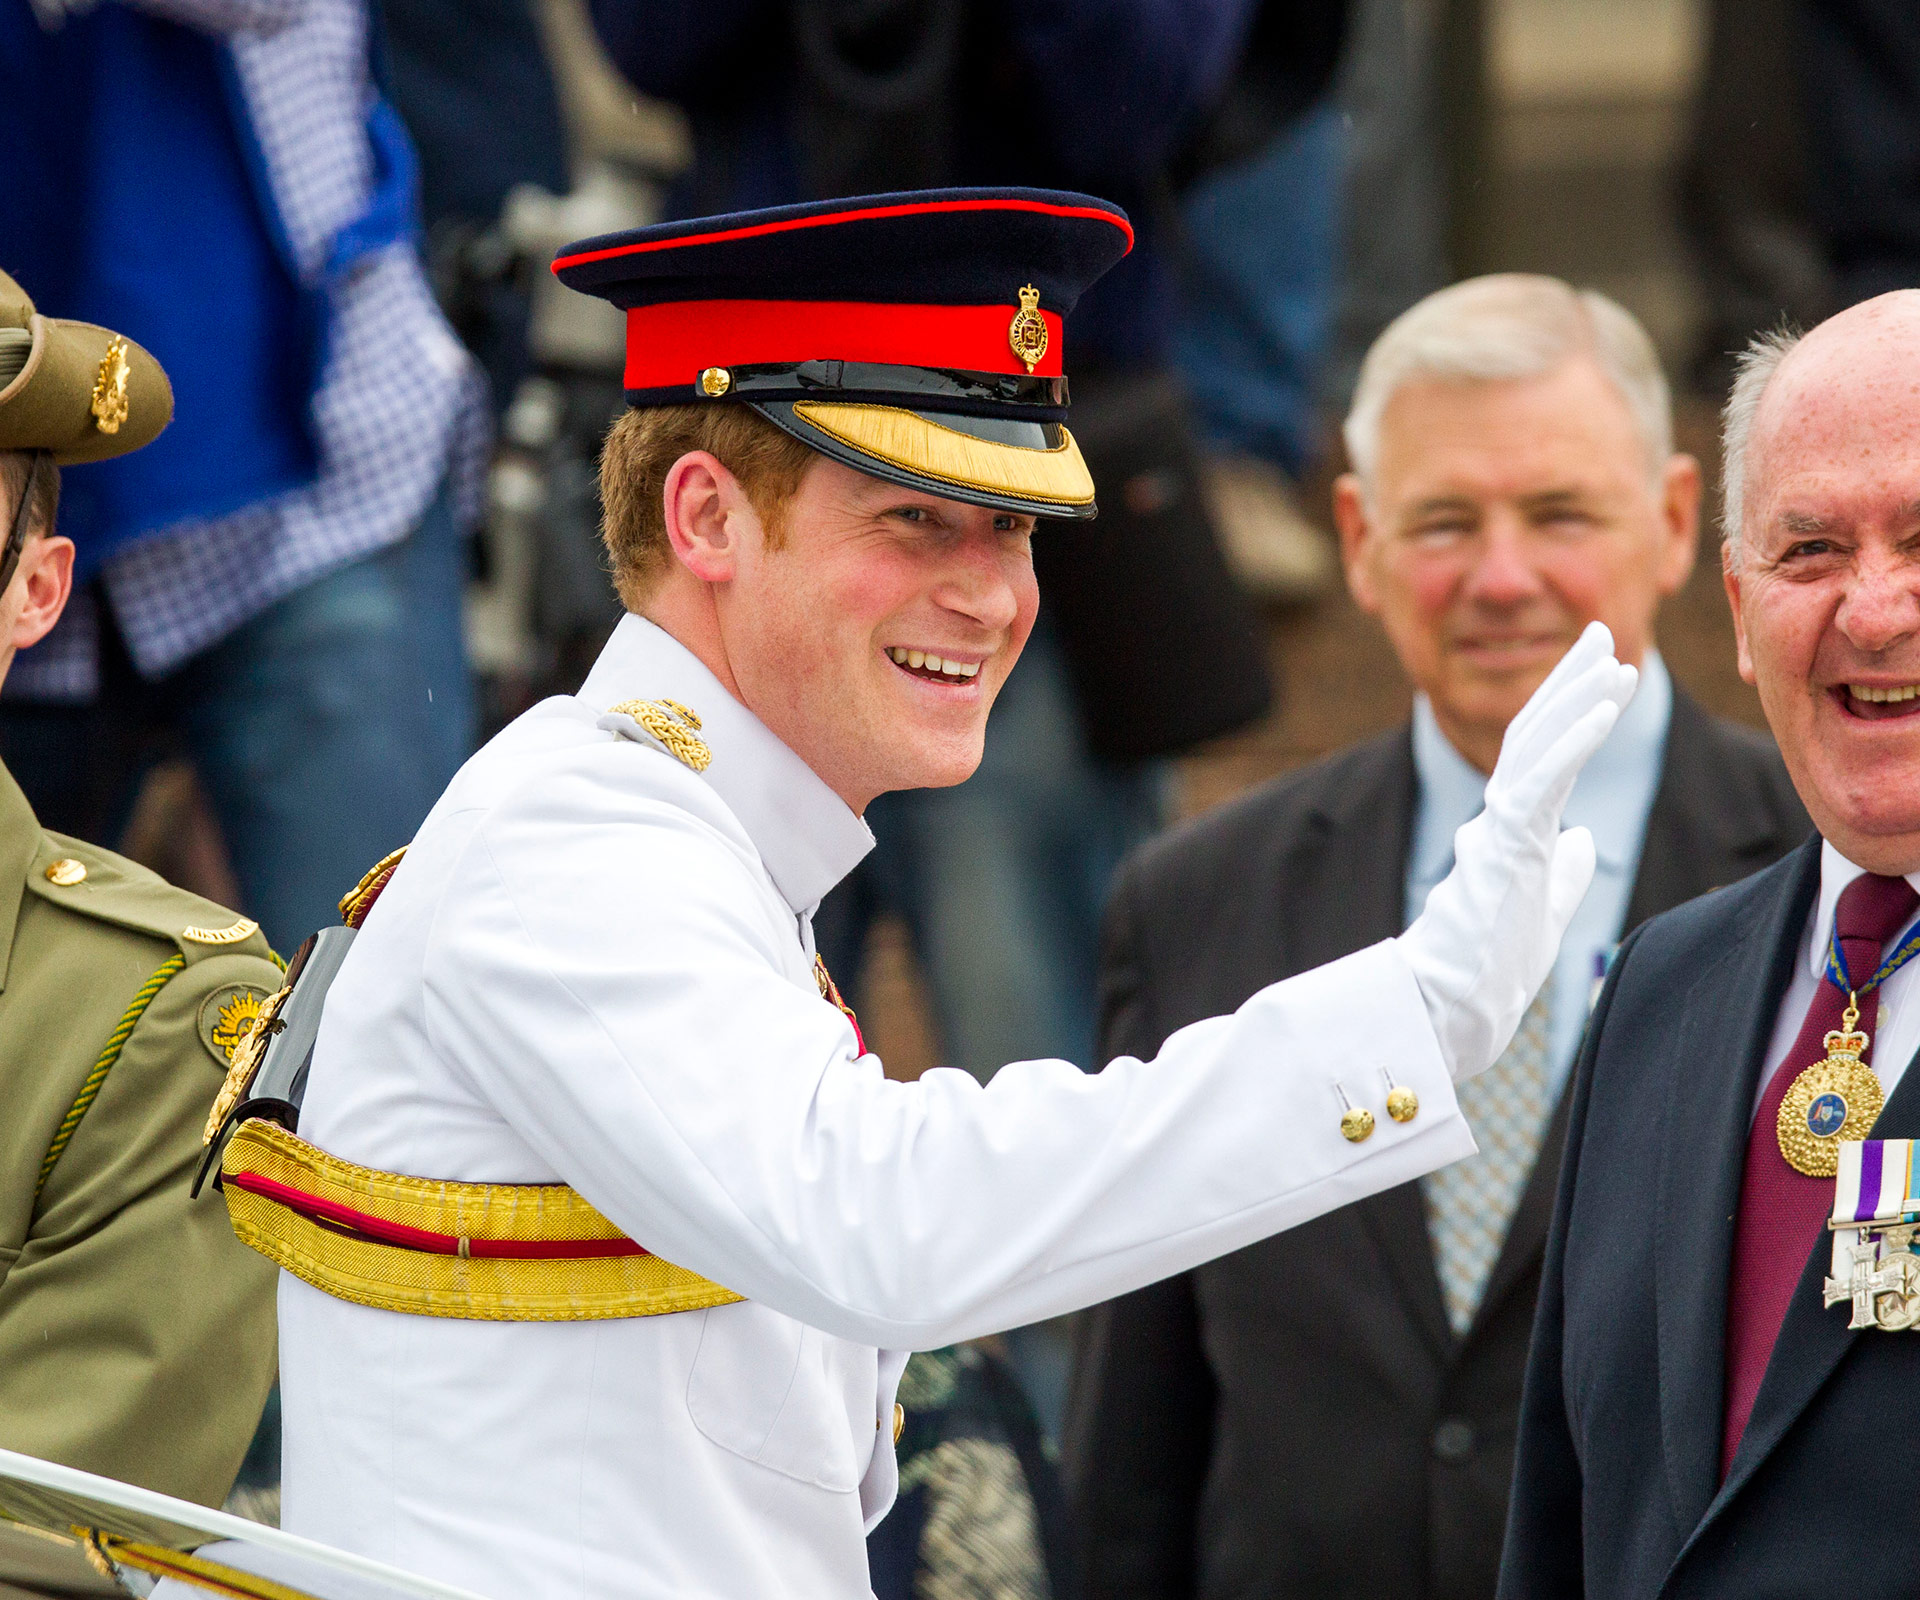 Prince Harry visits the National War Memorial in Canberra